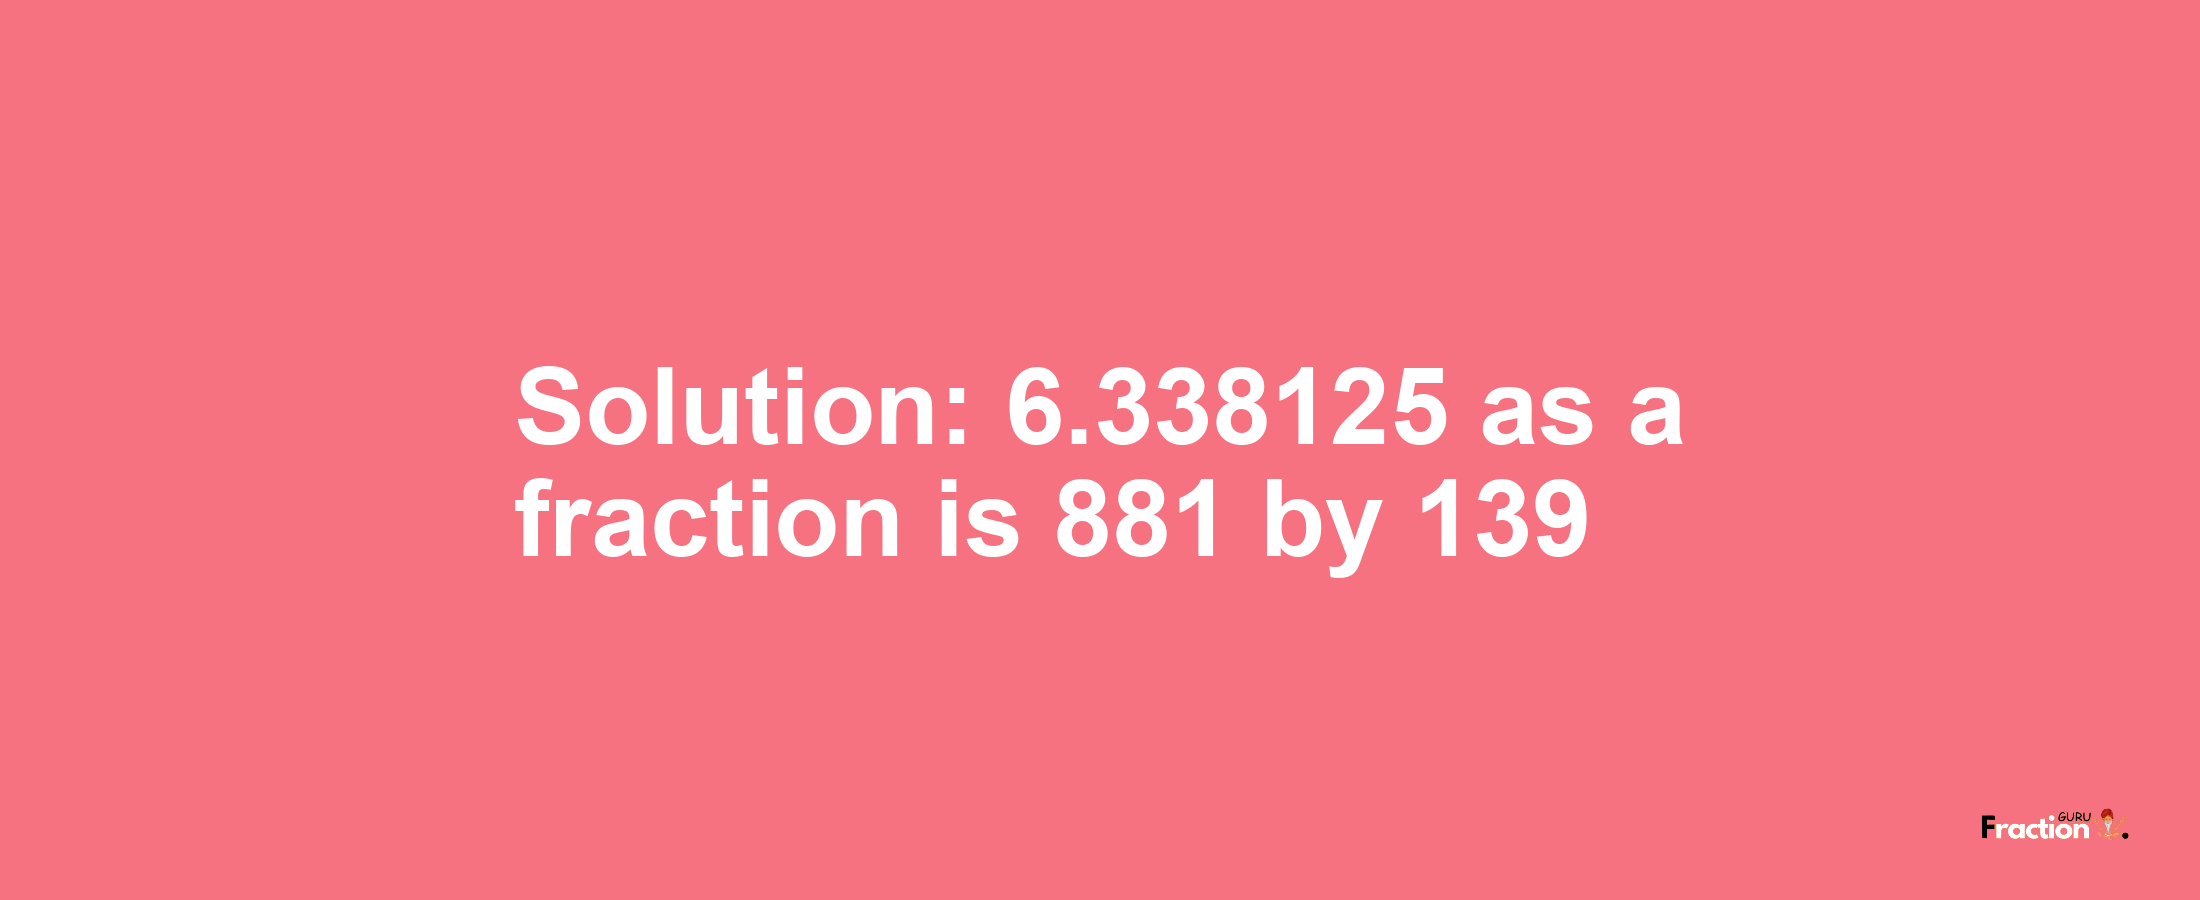 Solution:6.338125 as a fraction is 881/139